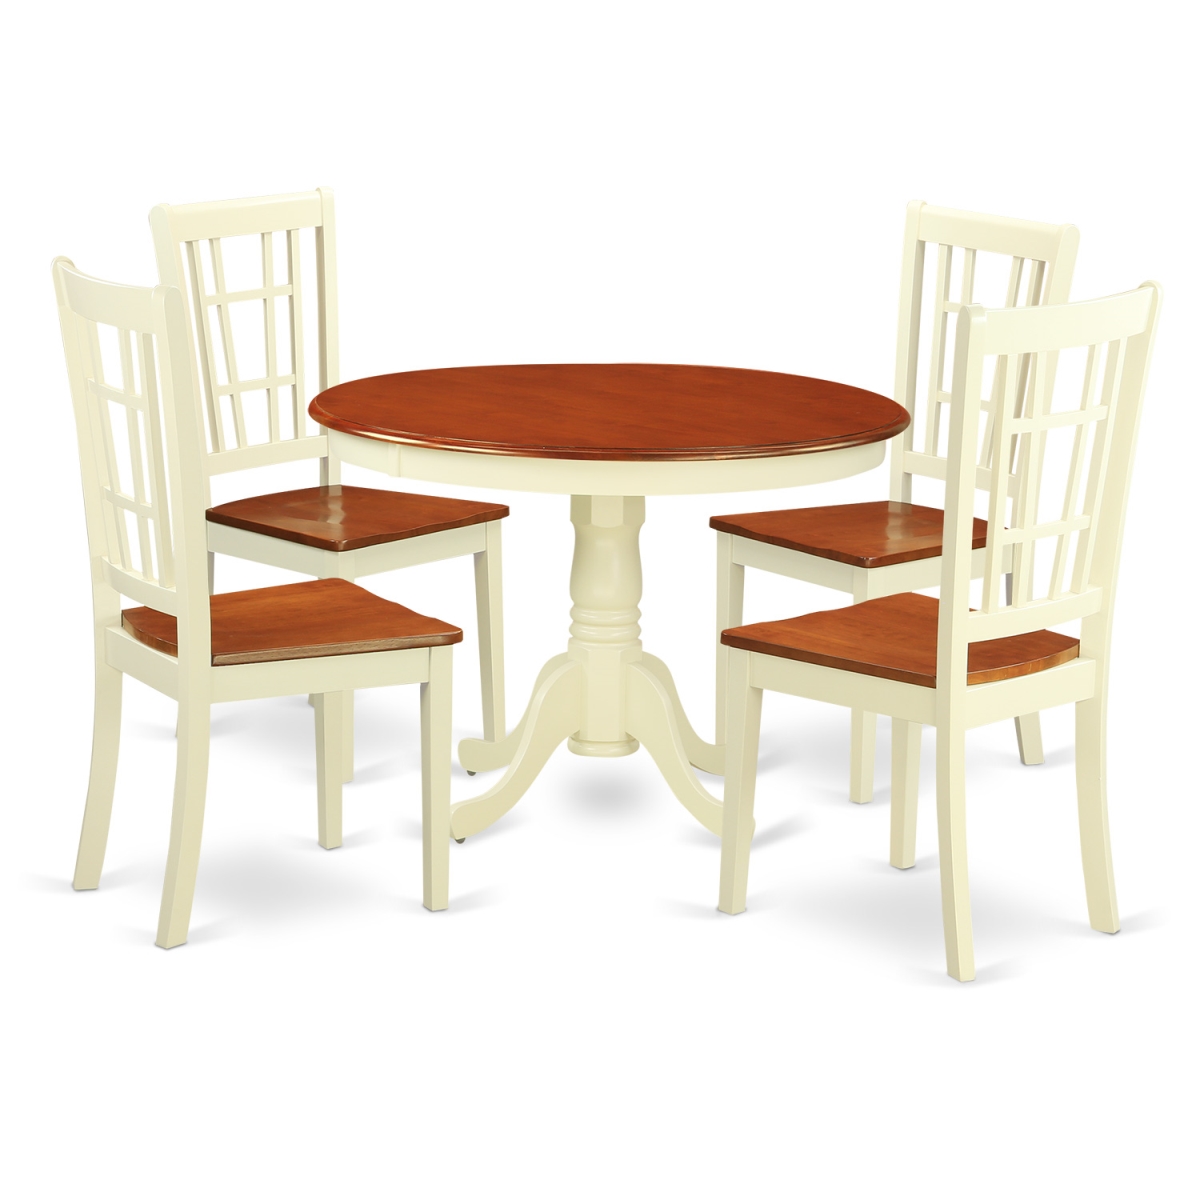 Picture of East West Furniture HLNI5-BMK-W Dining Set - One Round Table & 4 Chairs with Wood Seat&#44; Buttermilk & Cherry - 5 Piece - 42 in.